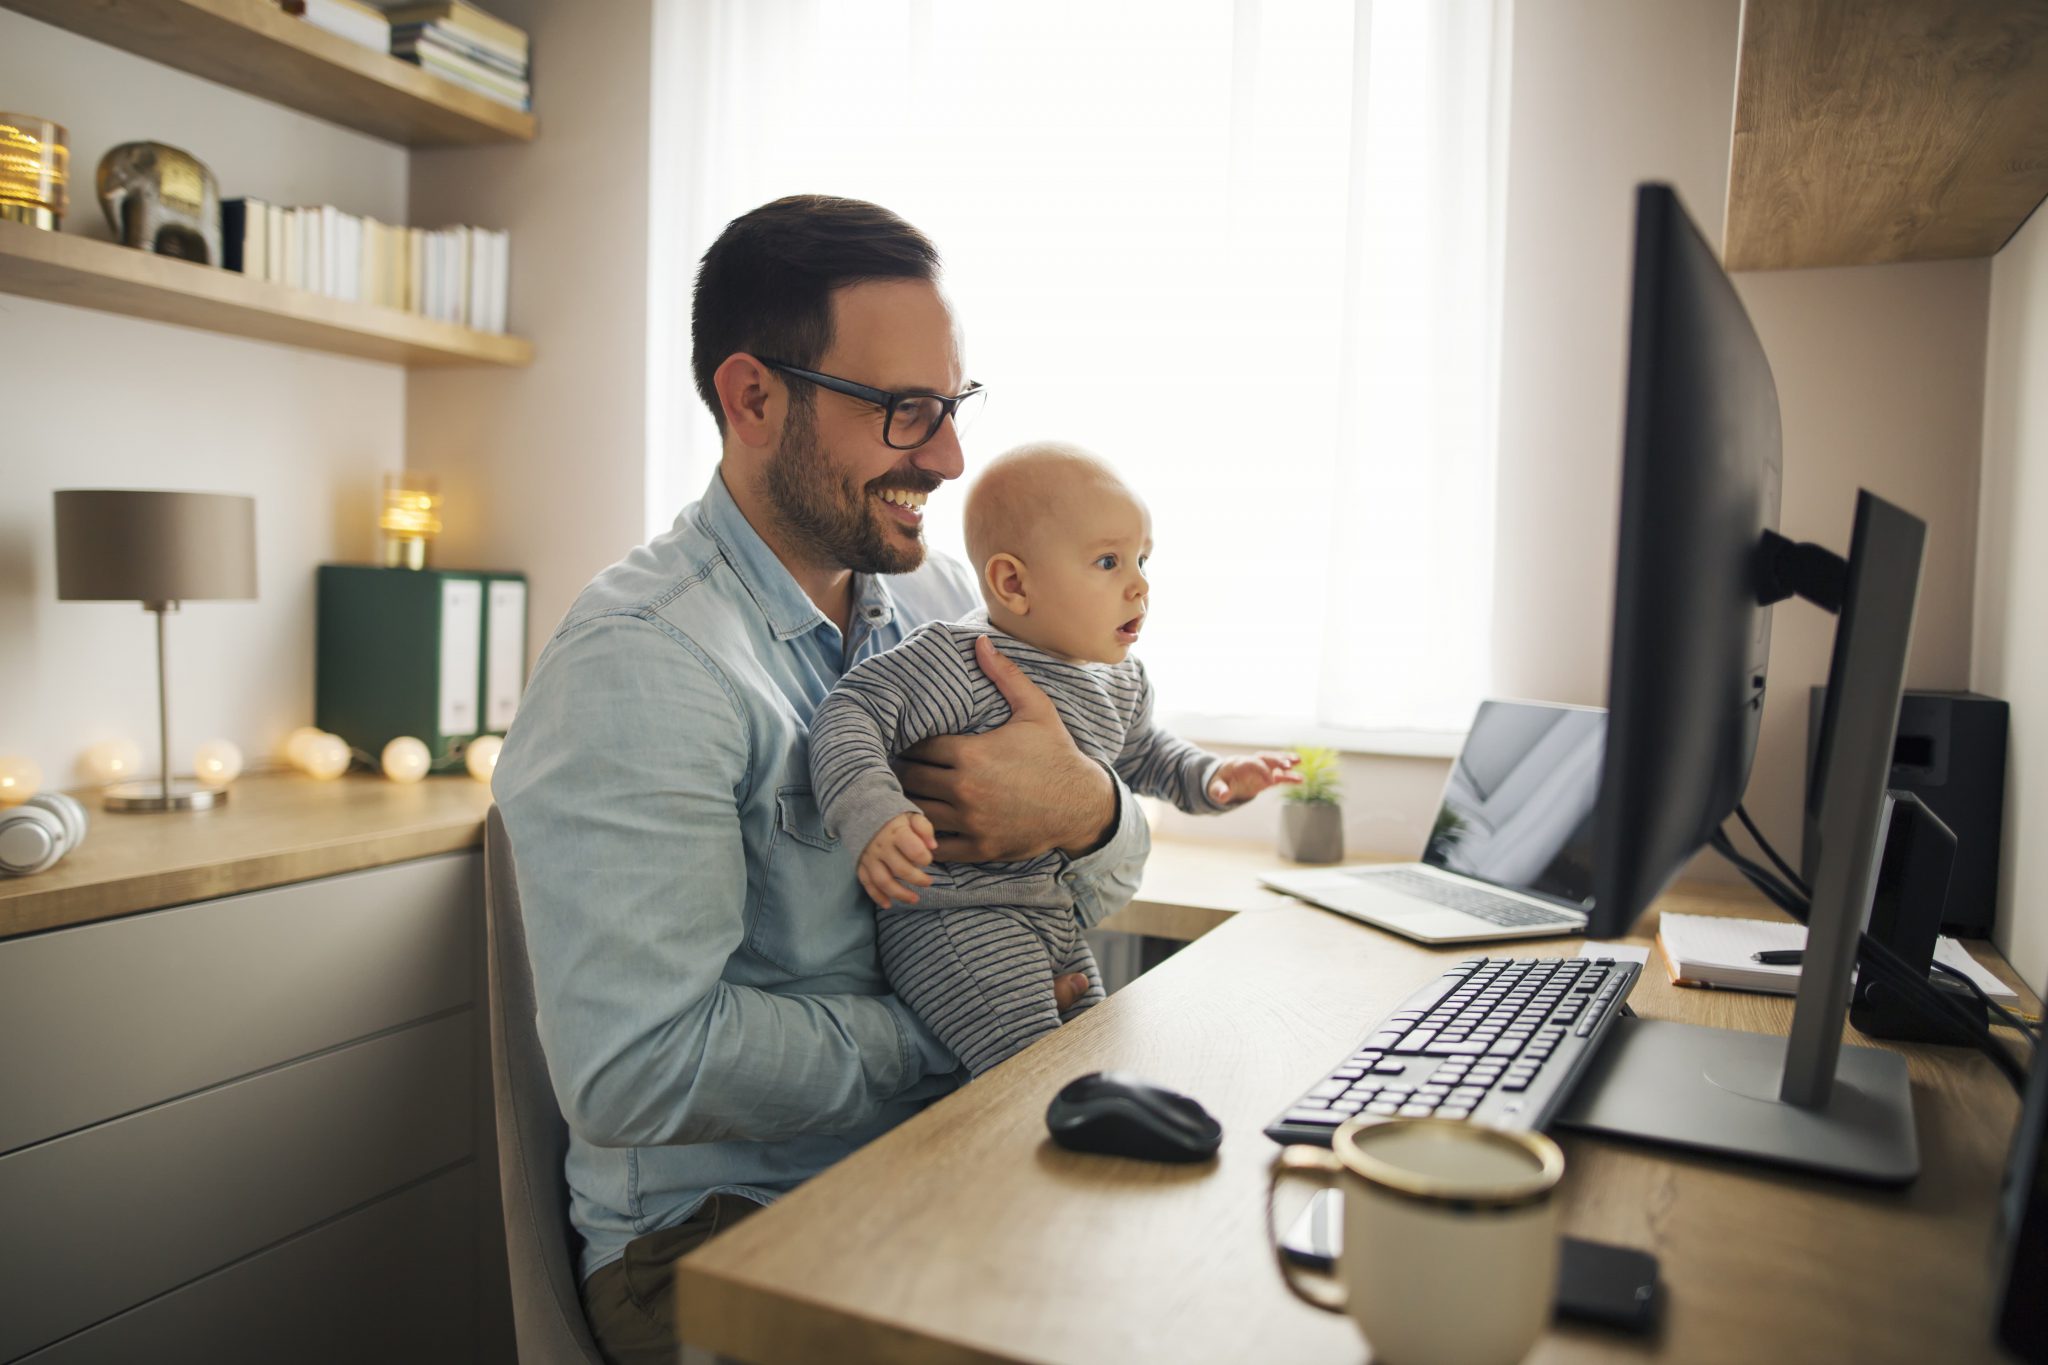 Father looks at computer with baby in lap